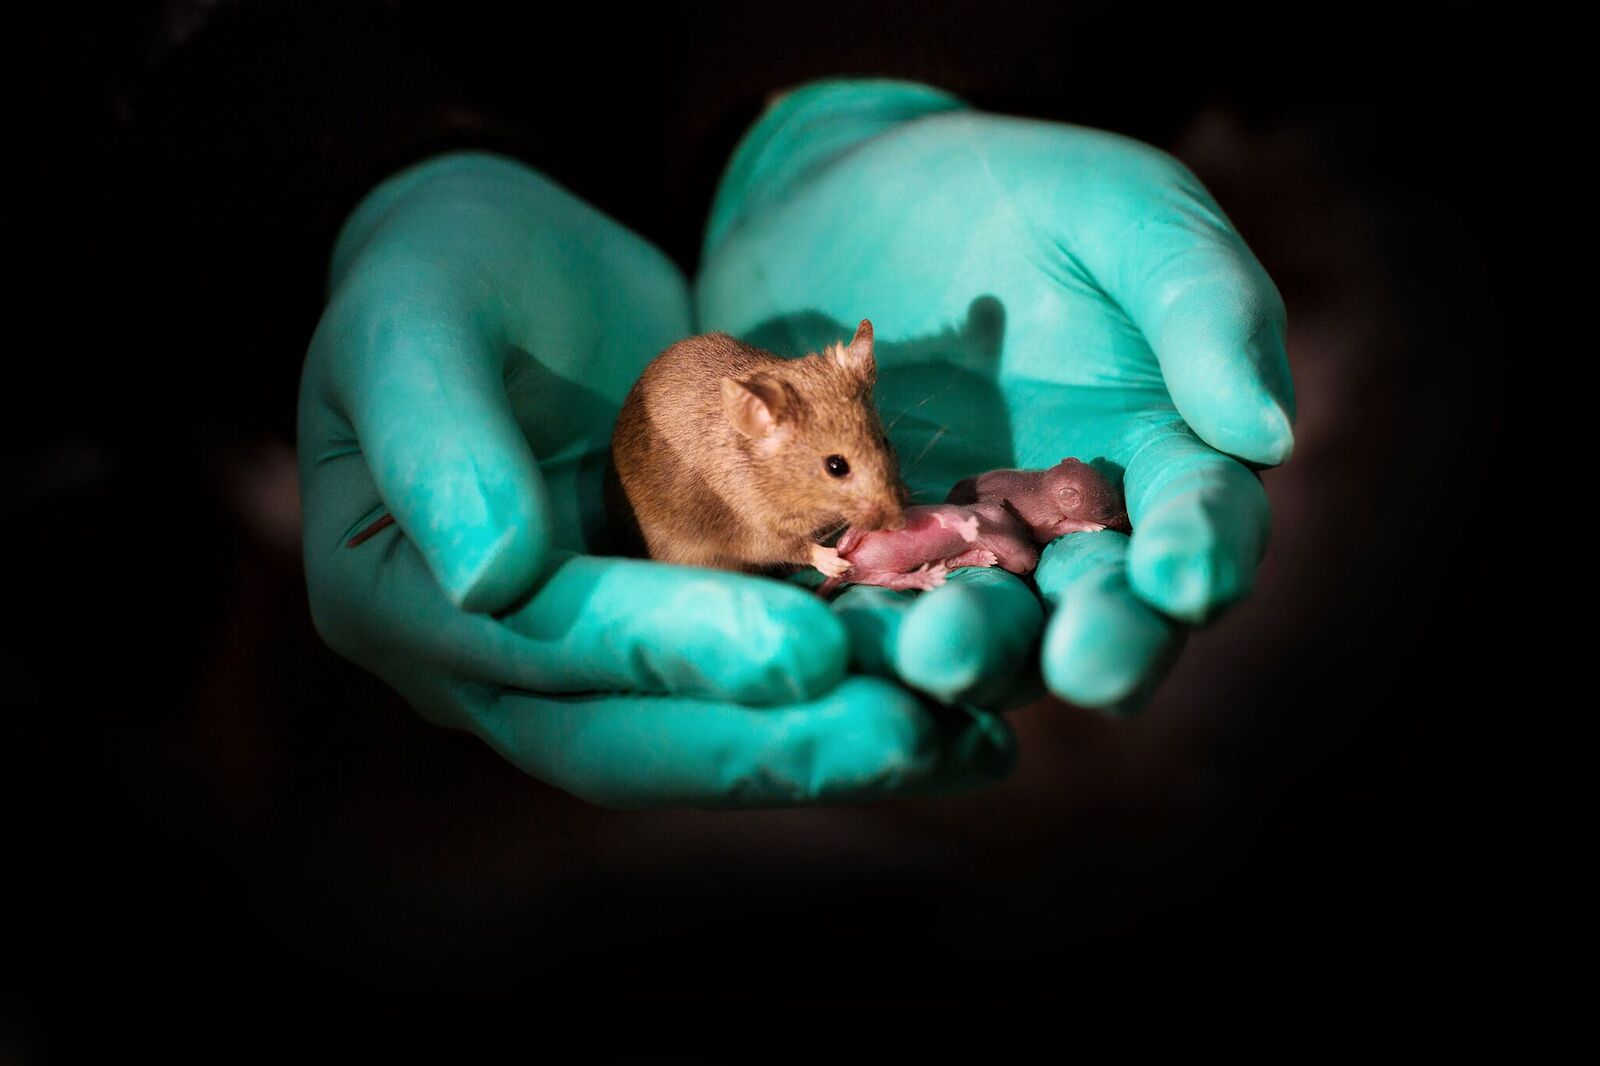 Scientists just created healthy mice with same-sex parents